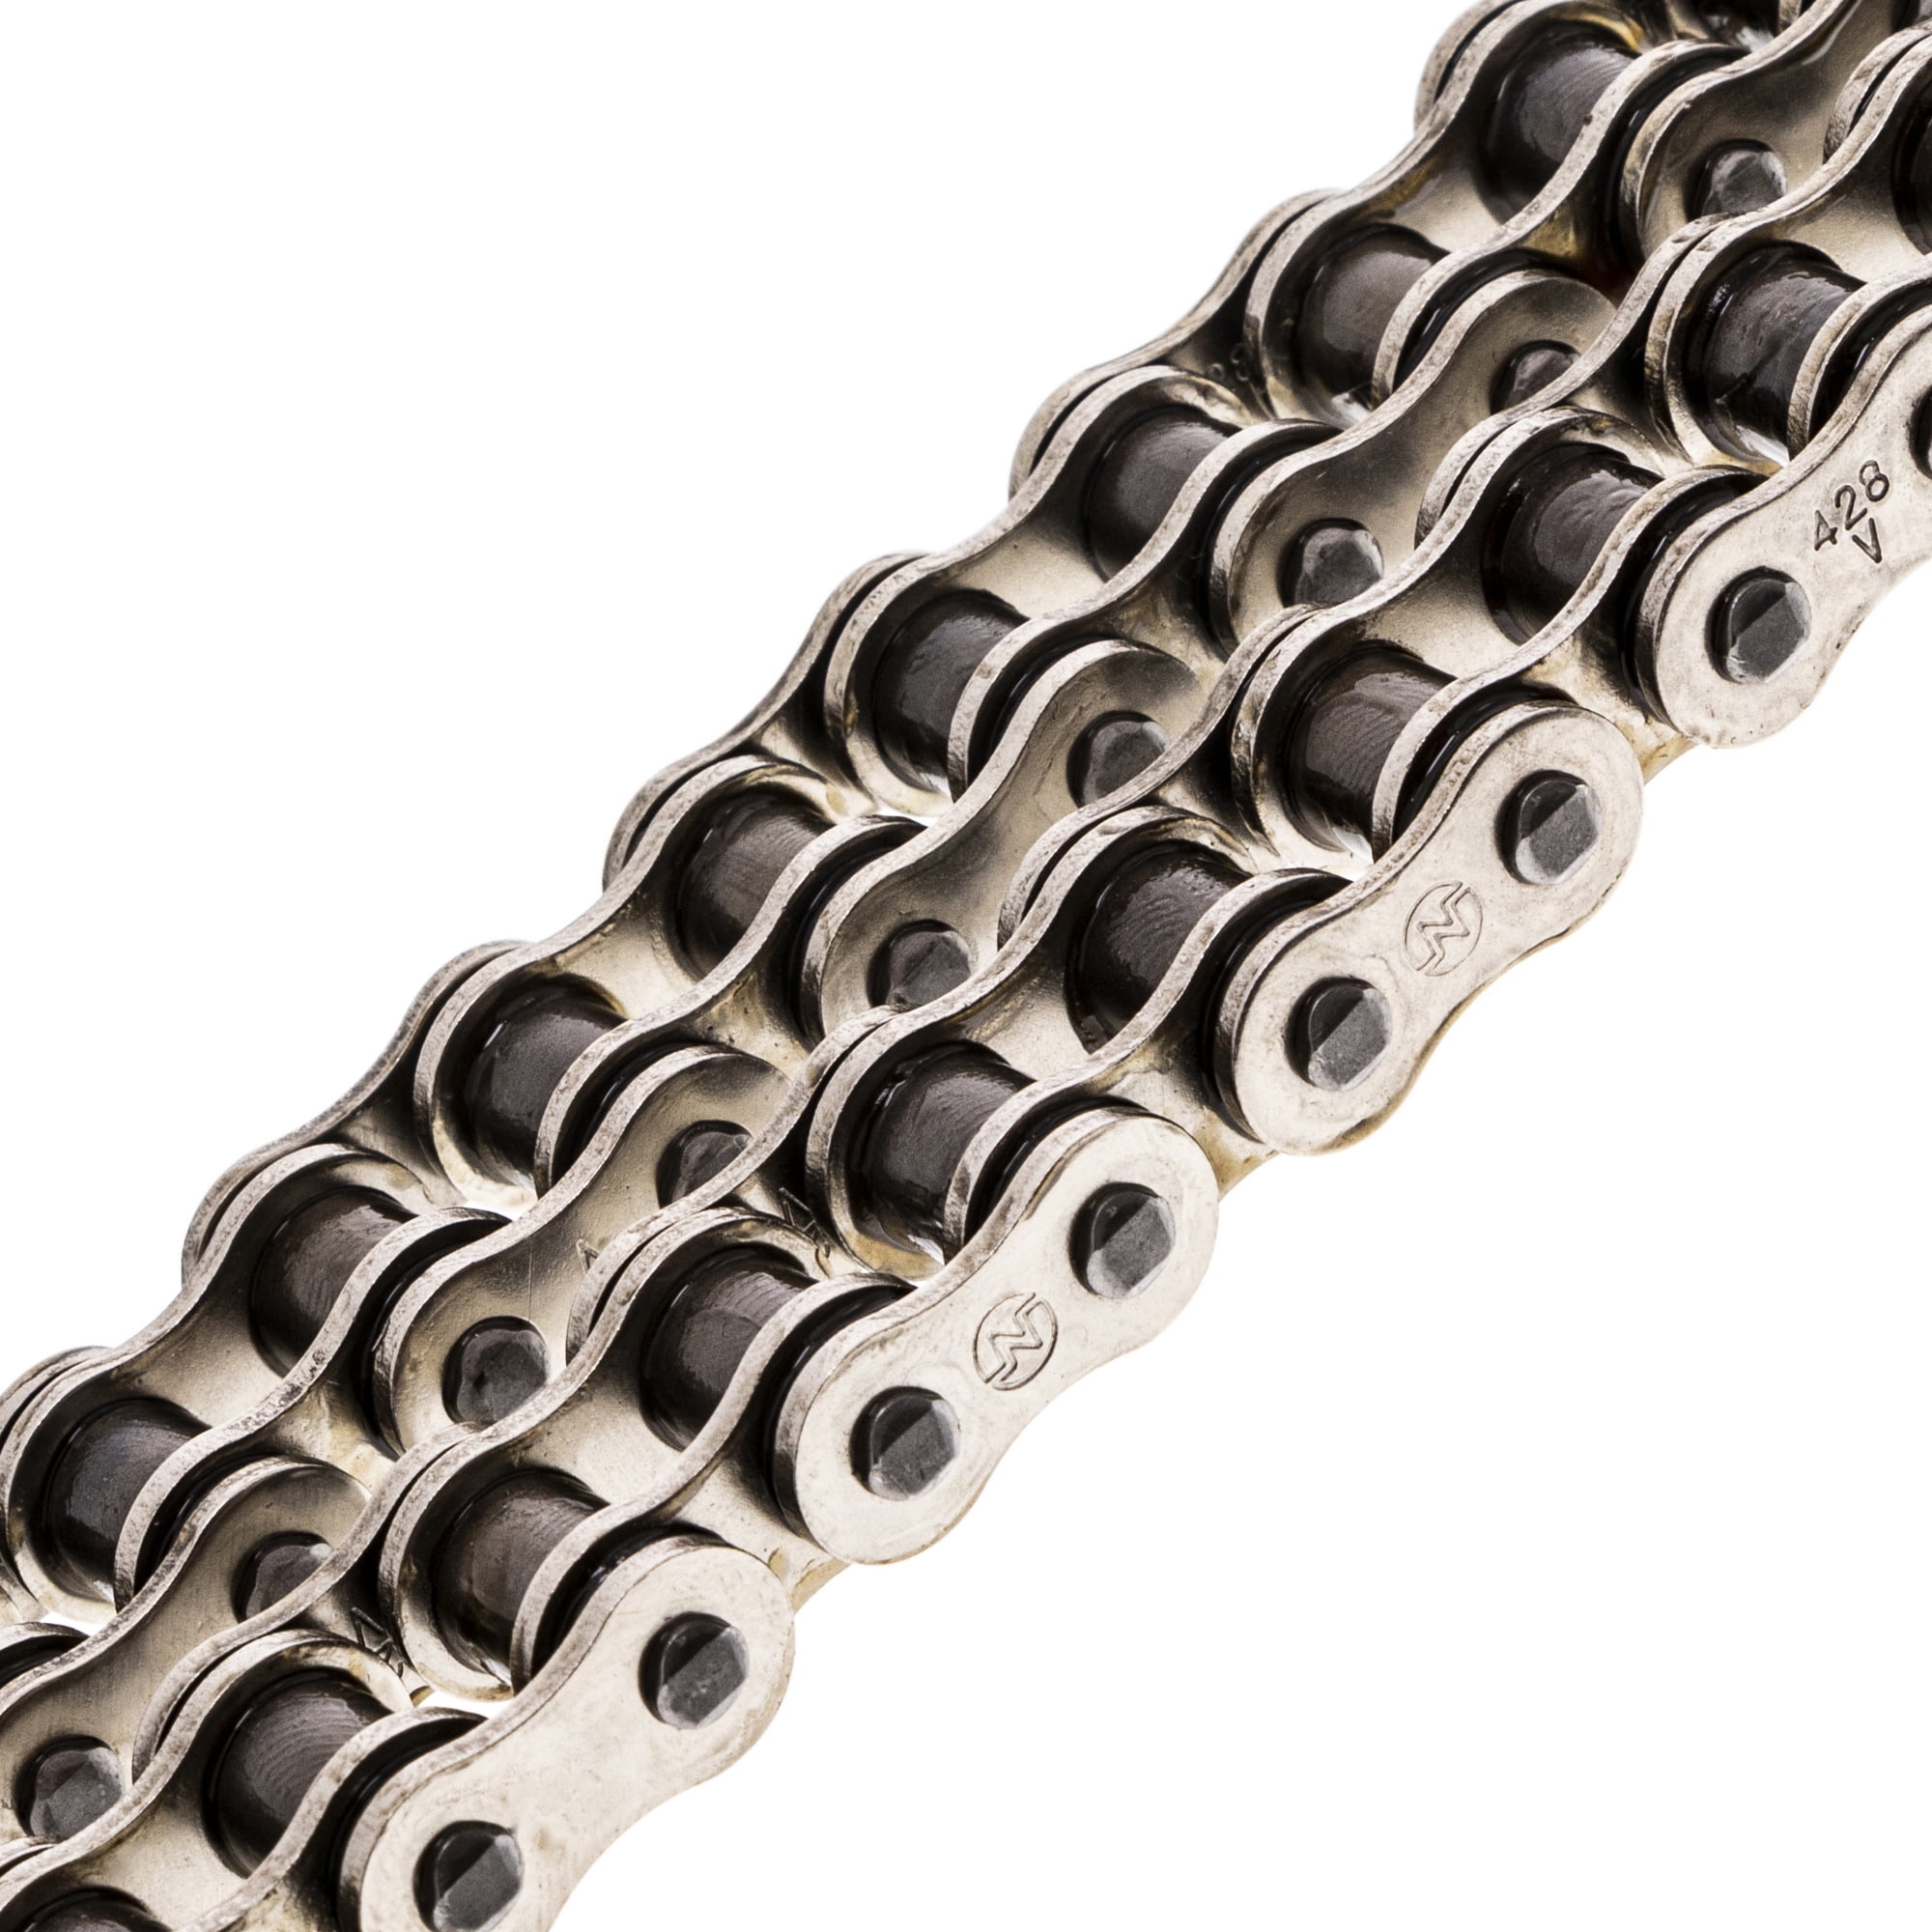 JINFANNIBI 428 428H Drive Chain 118 Links O-Ring With Connecting Master Link for Motorcycle ATV Dirt Bike